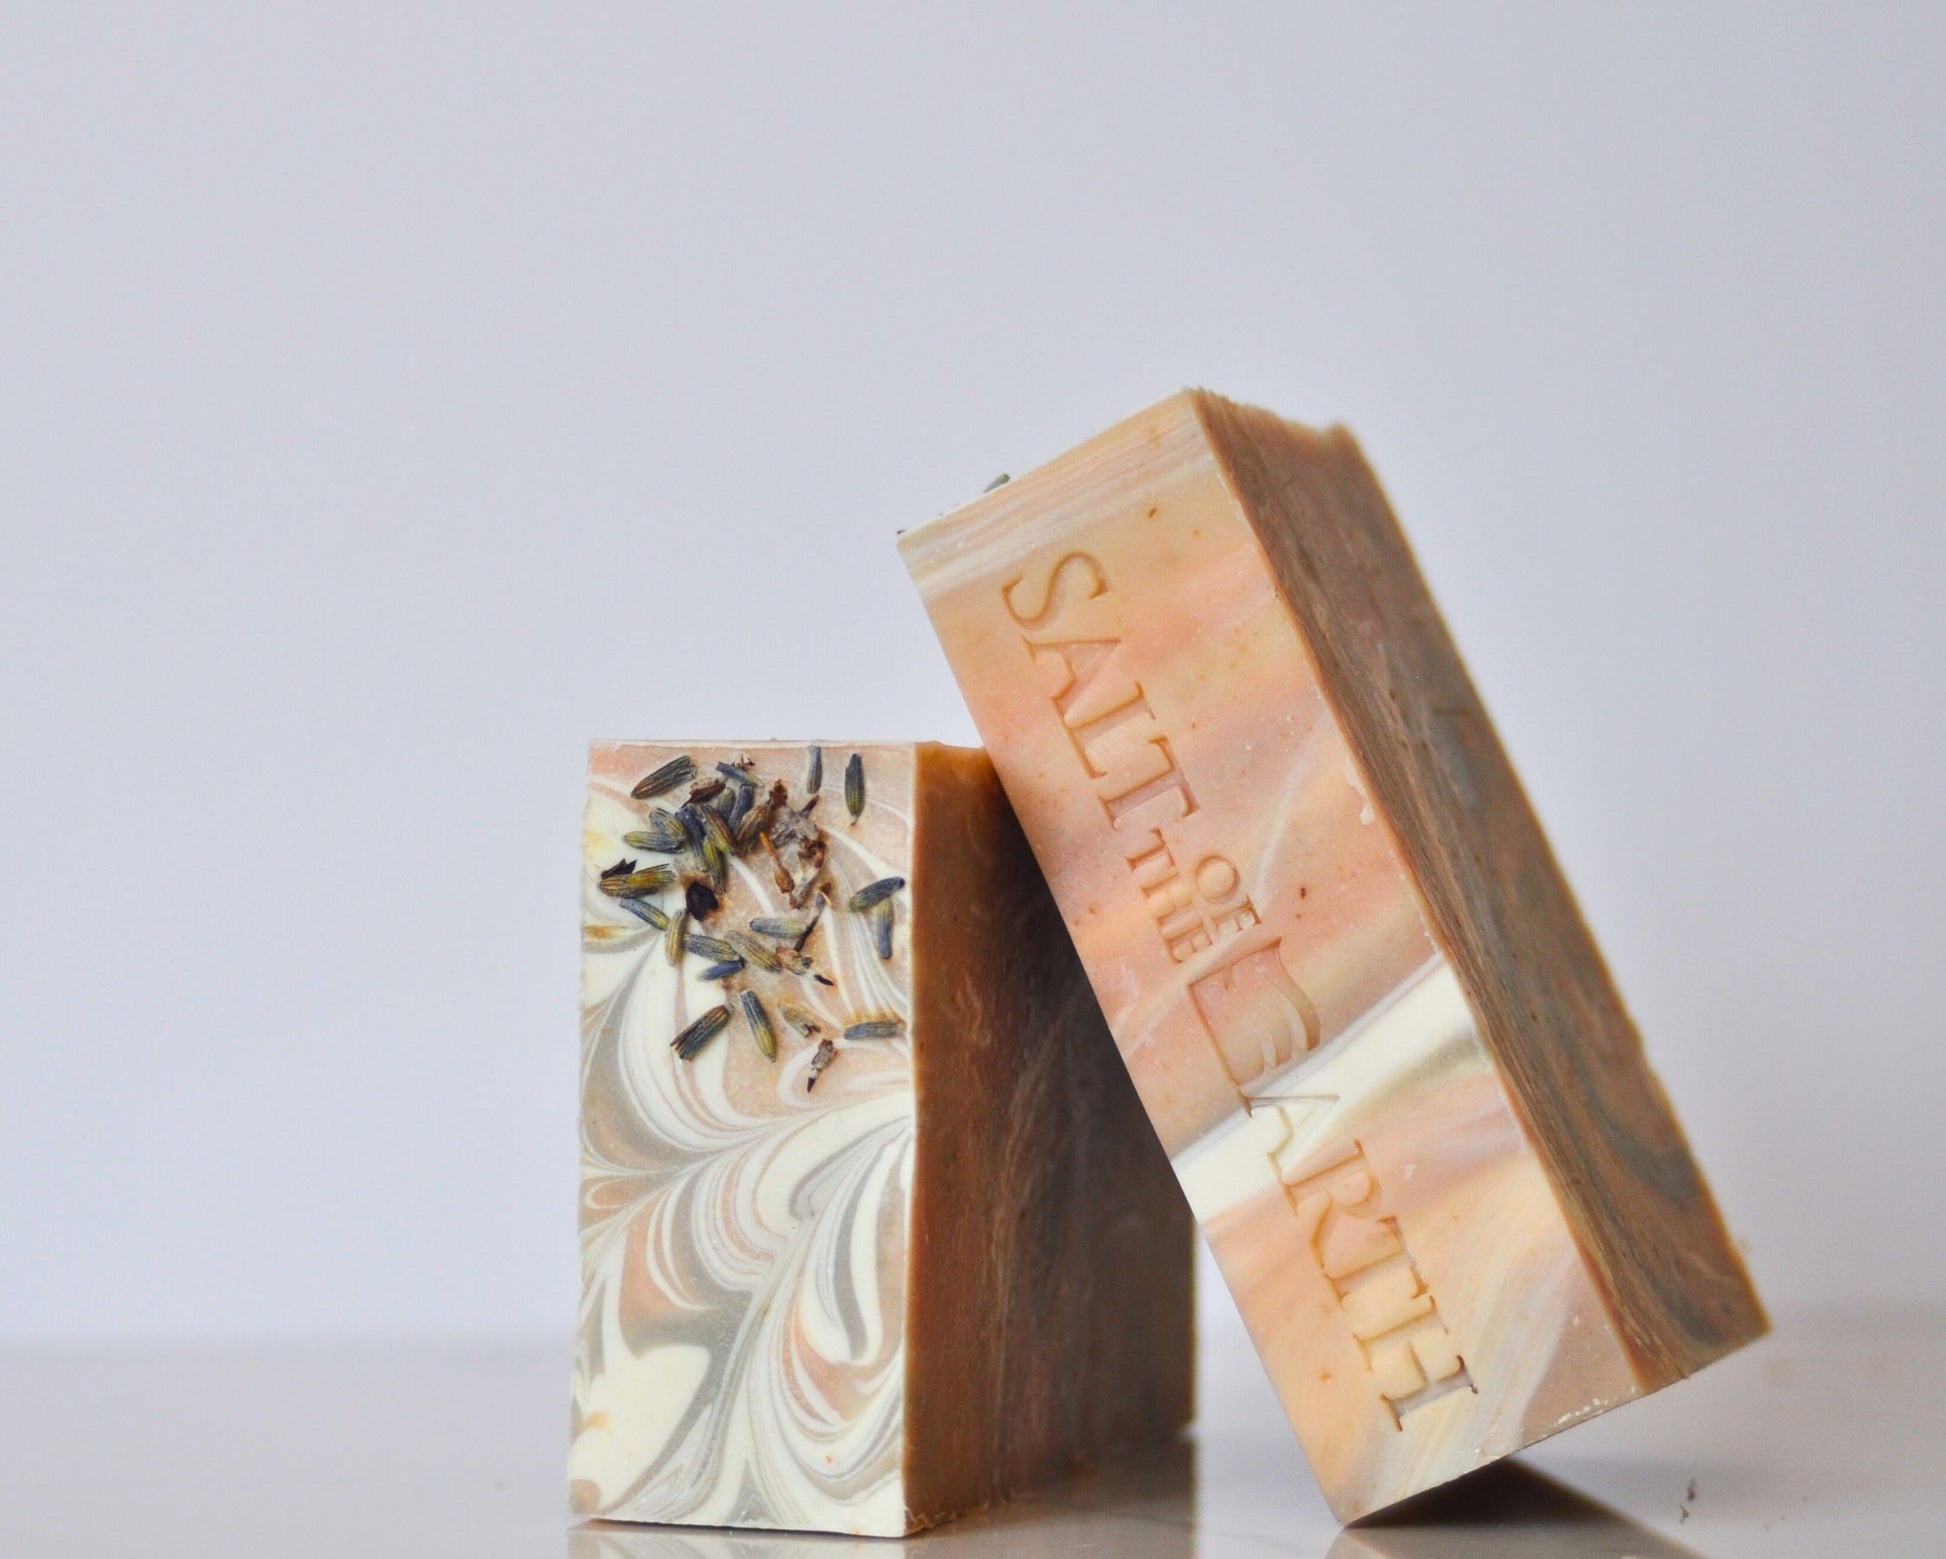 OATMILK & LAVENDER |  SHEA BUTTER TRANQUILITY & RELAXATION ARTISAN BAR SOAP - SALT OF THE EARTH